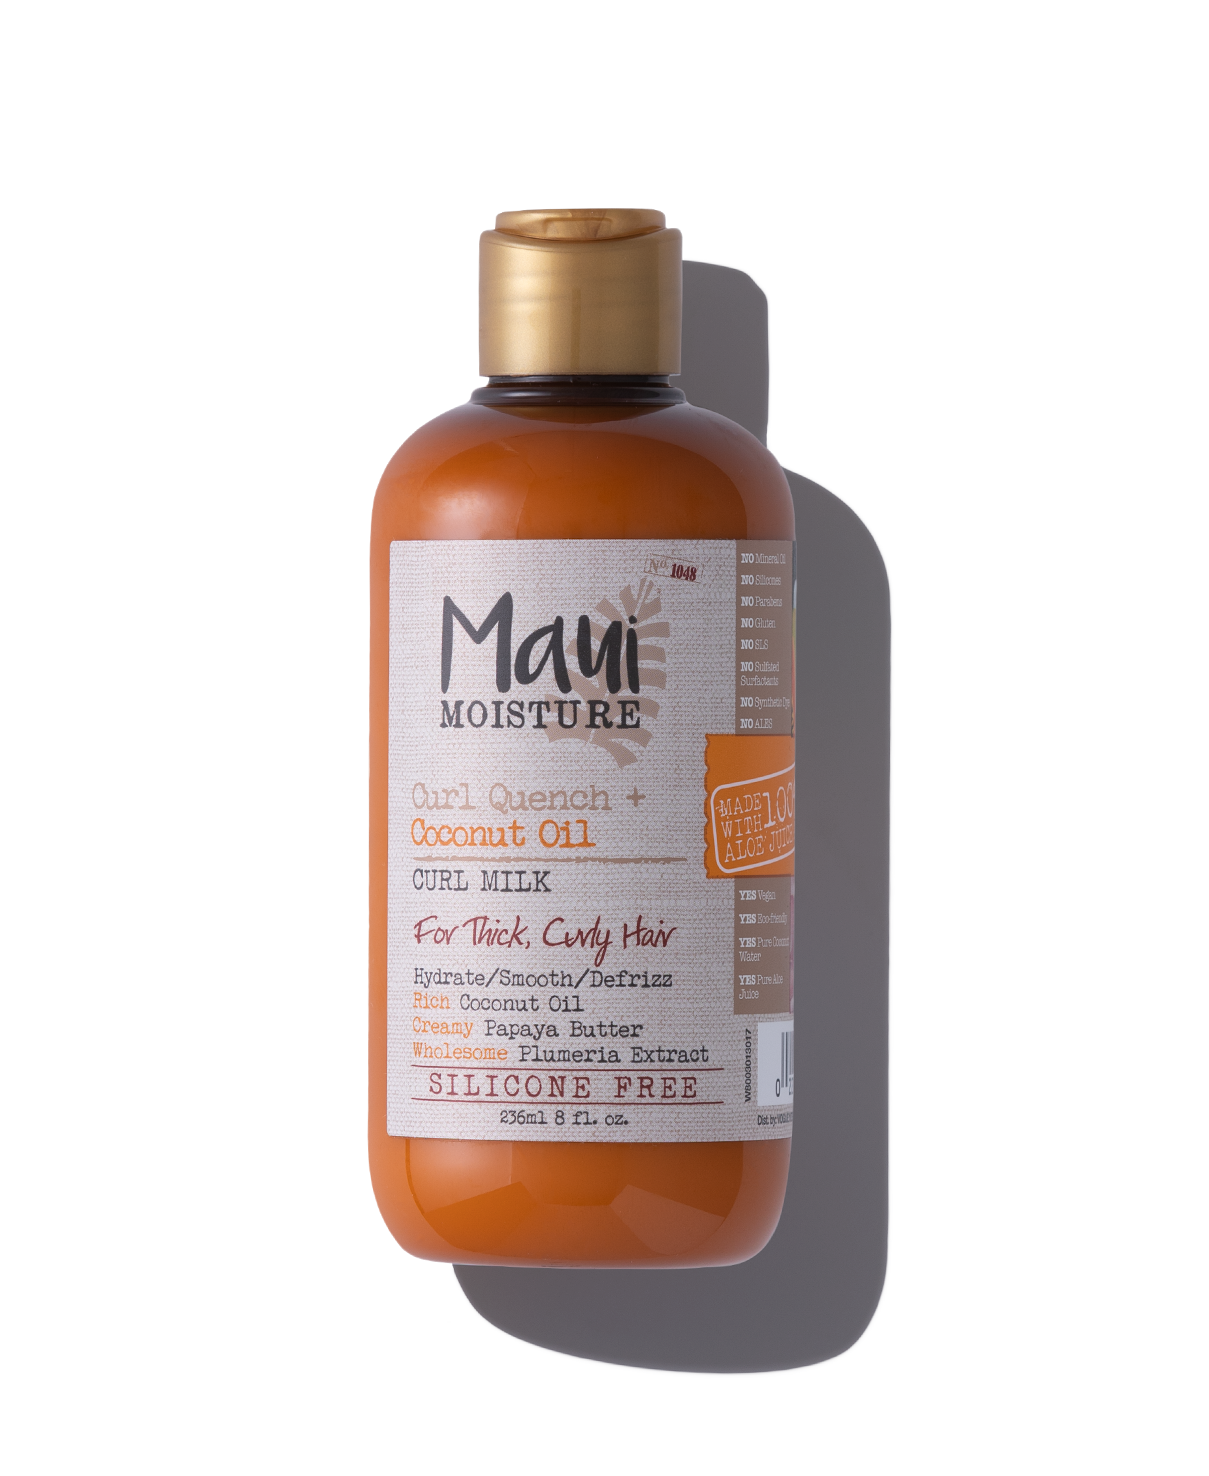 Maui Moisture Curl Quench + Coconut Oil Anti-Frizz Curl-Defining Hair Milk to Hydrate and Detangle Tight Curly Hair